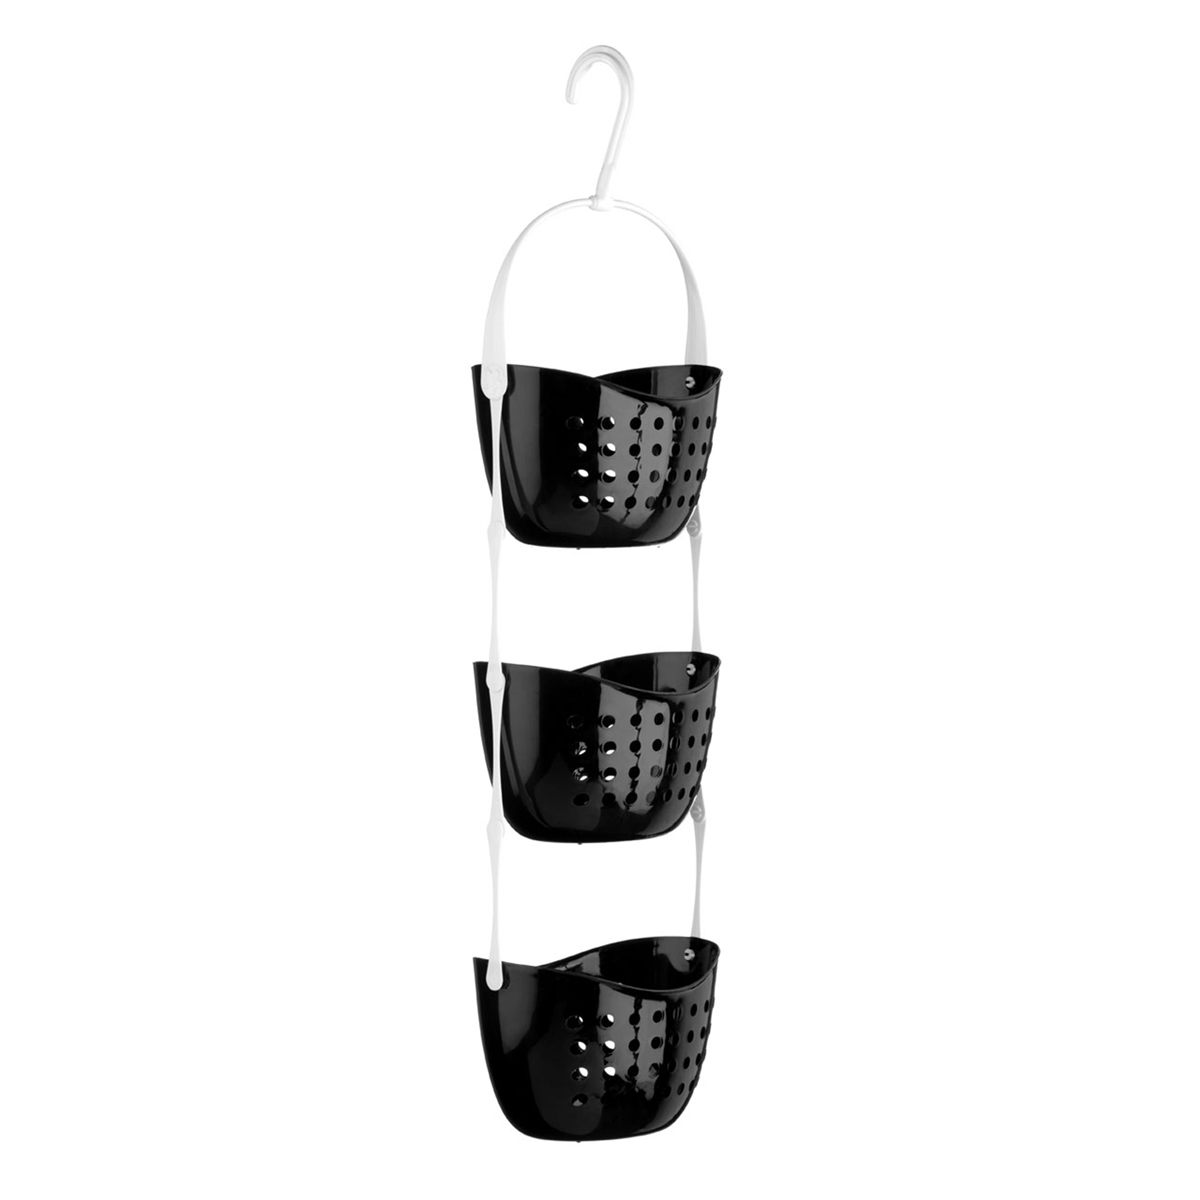 Accents Black 3 tier hanging shower caddy